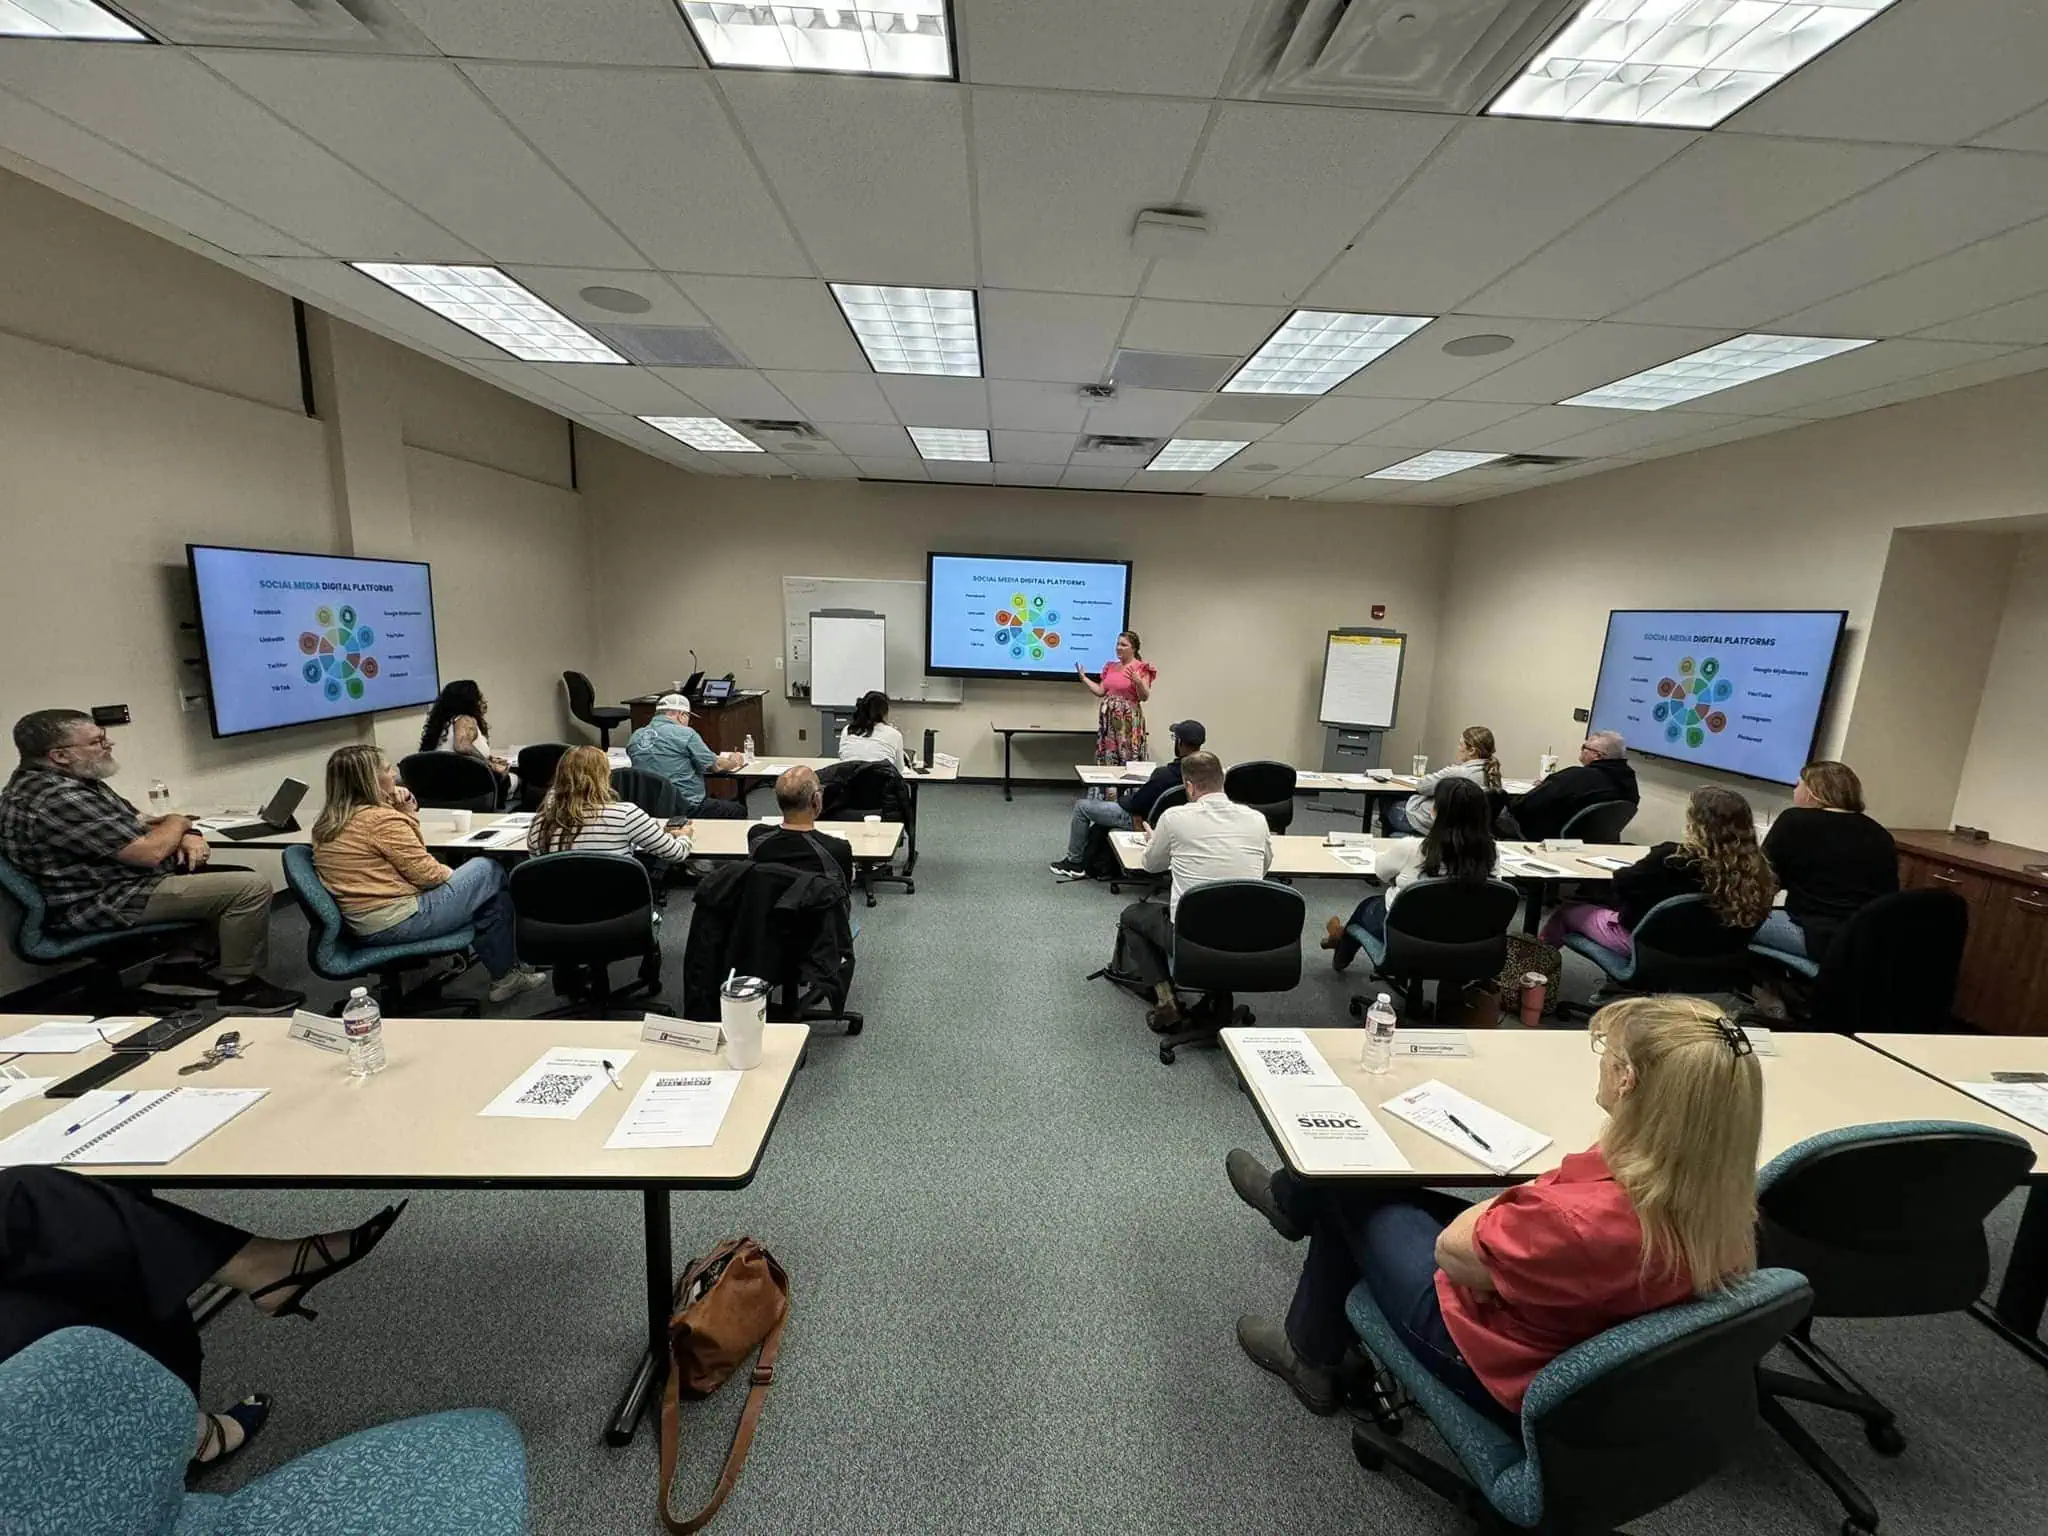 A classroom at Brazosport College Small Business Development Center. Margarey Valdez of MDT is presenting near a screen displaying "Social Media Digital Platforms." Several other screens around the room show the same diagram. Papers and notebooks are on the tables. - Market Design Team: Define. Structure. Expand.